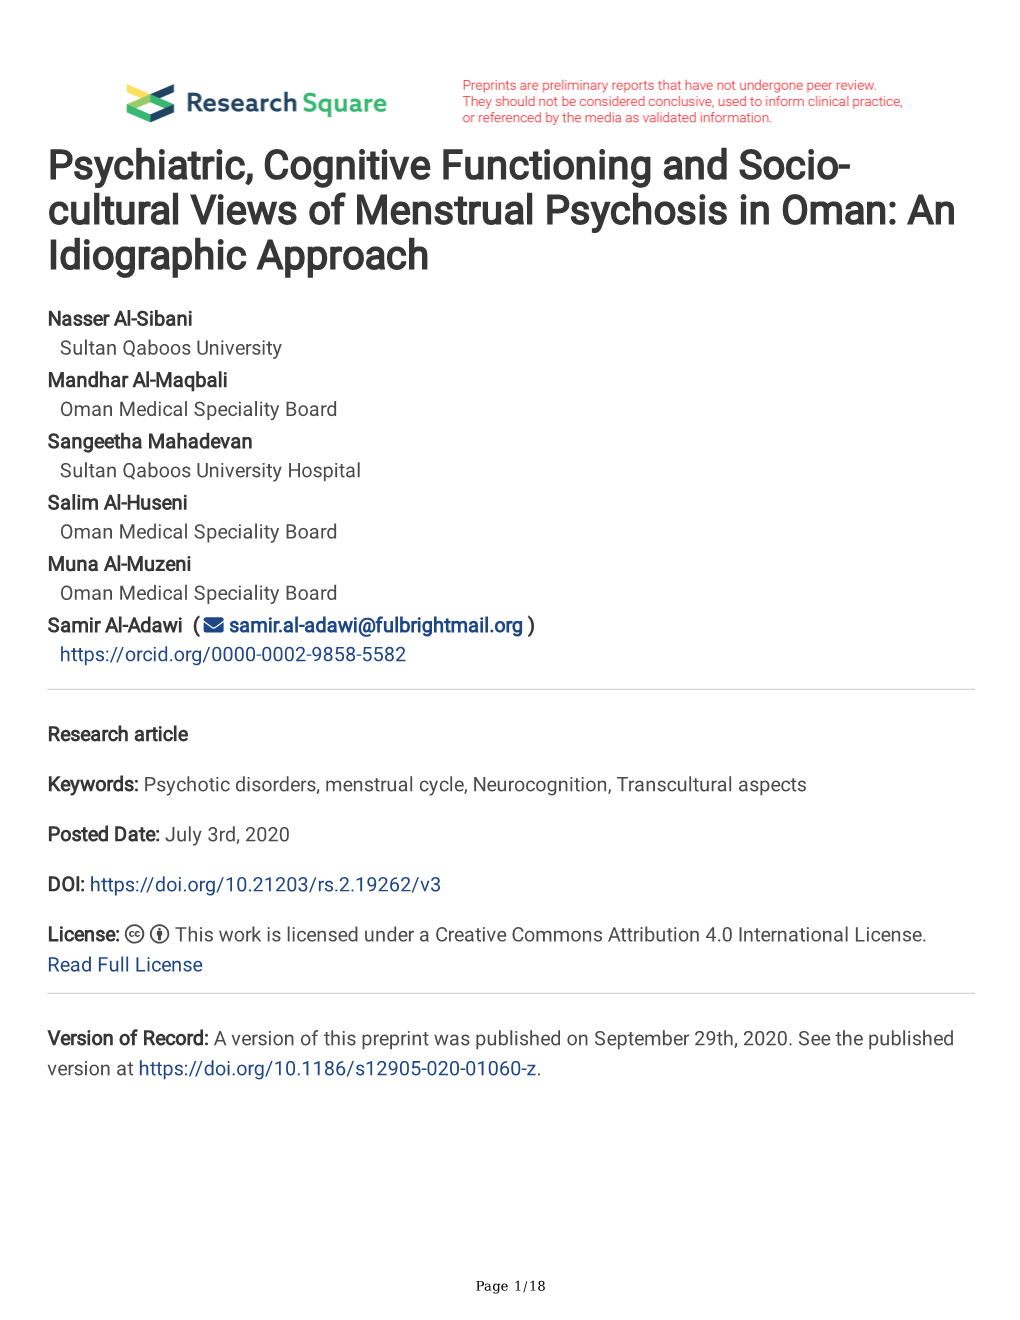 Psychiatric, Cognitive Functioning and Socio- Cultural Views of Menstrual Psychosis in Oman: an Idiographic Approach